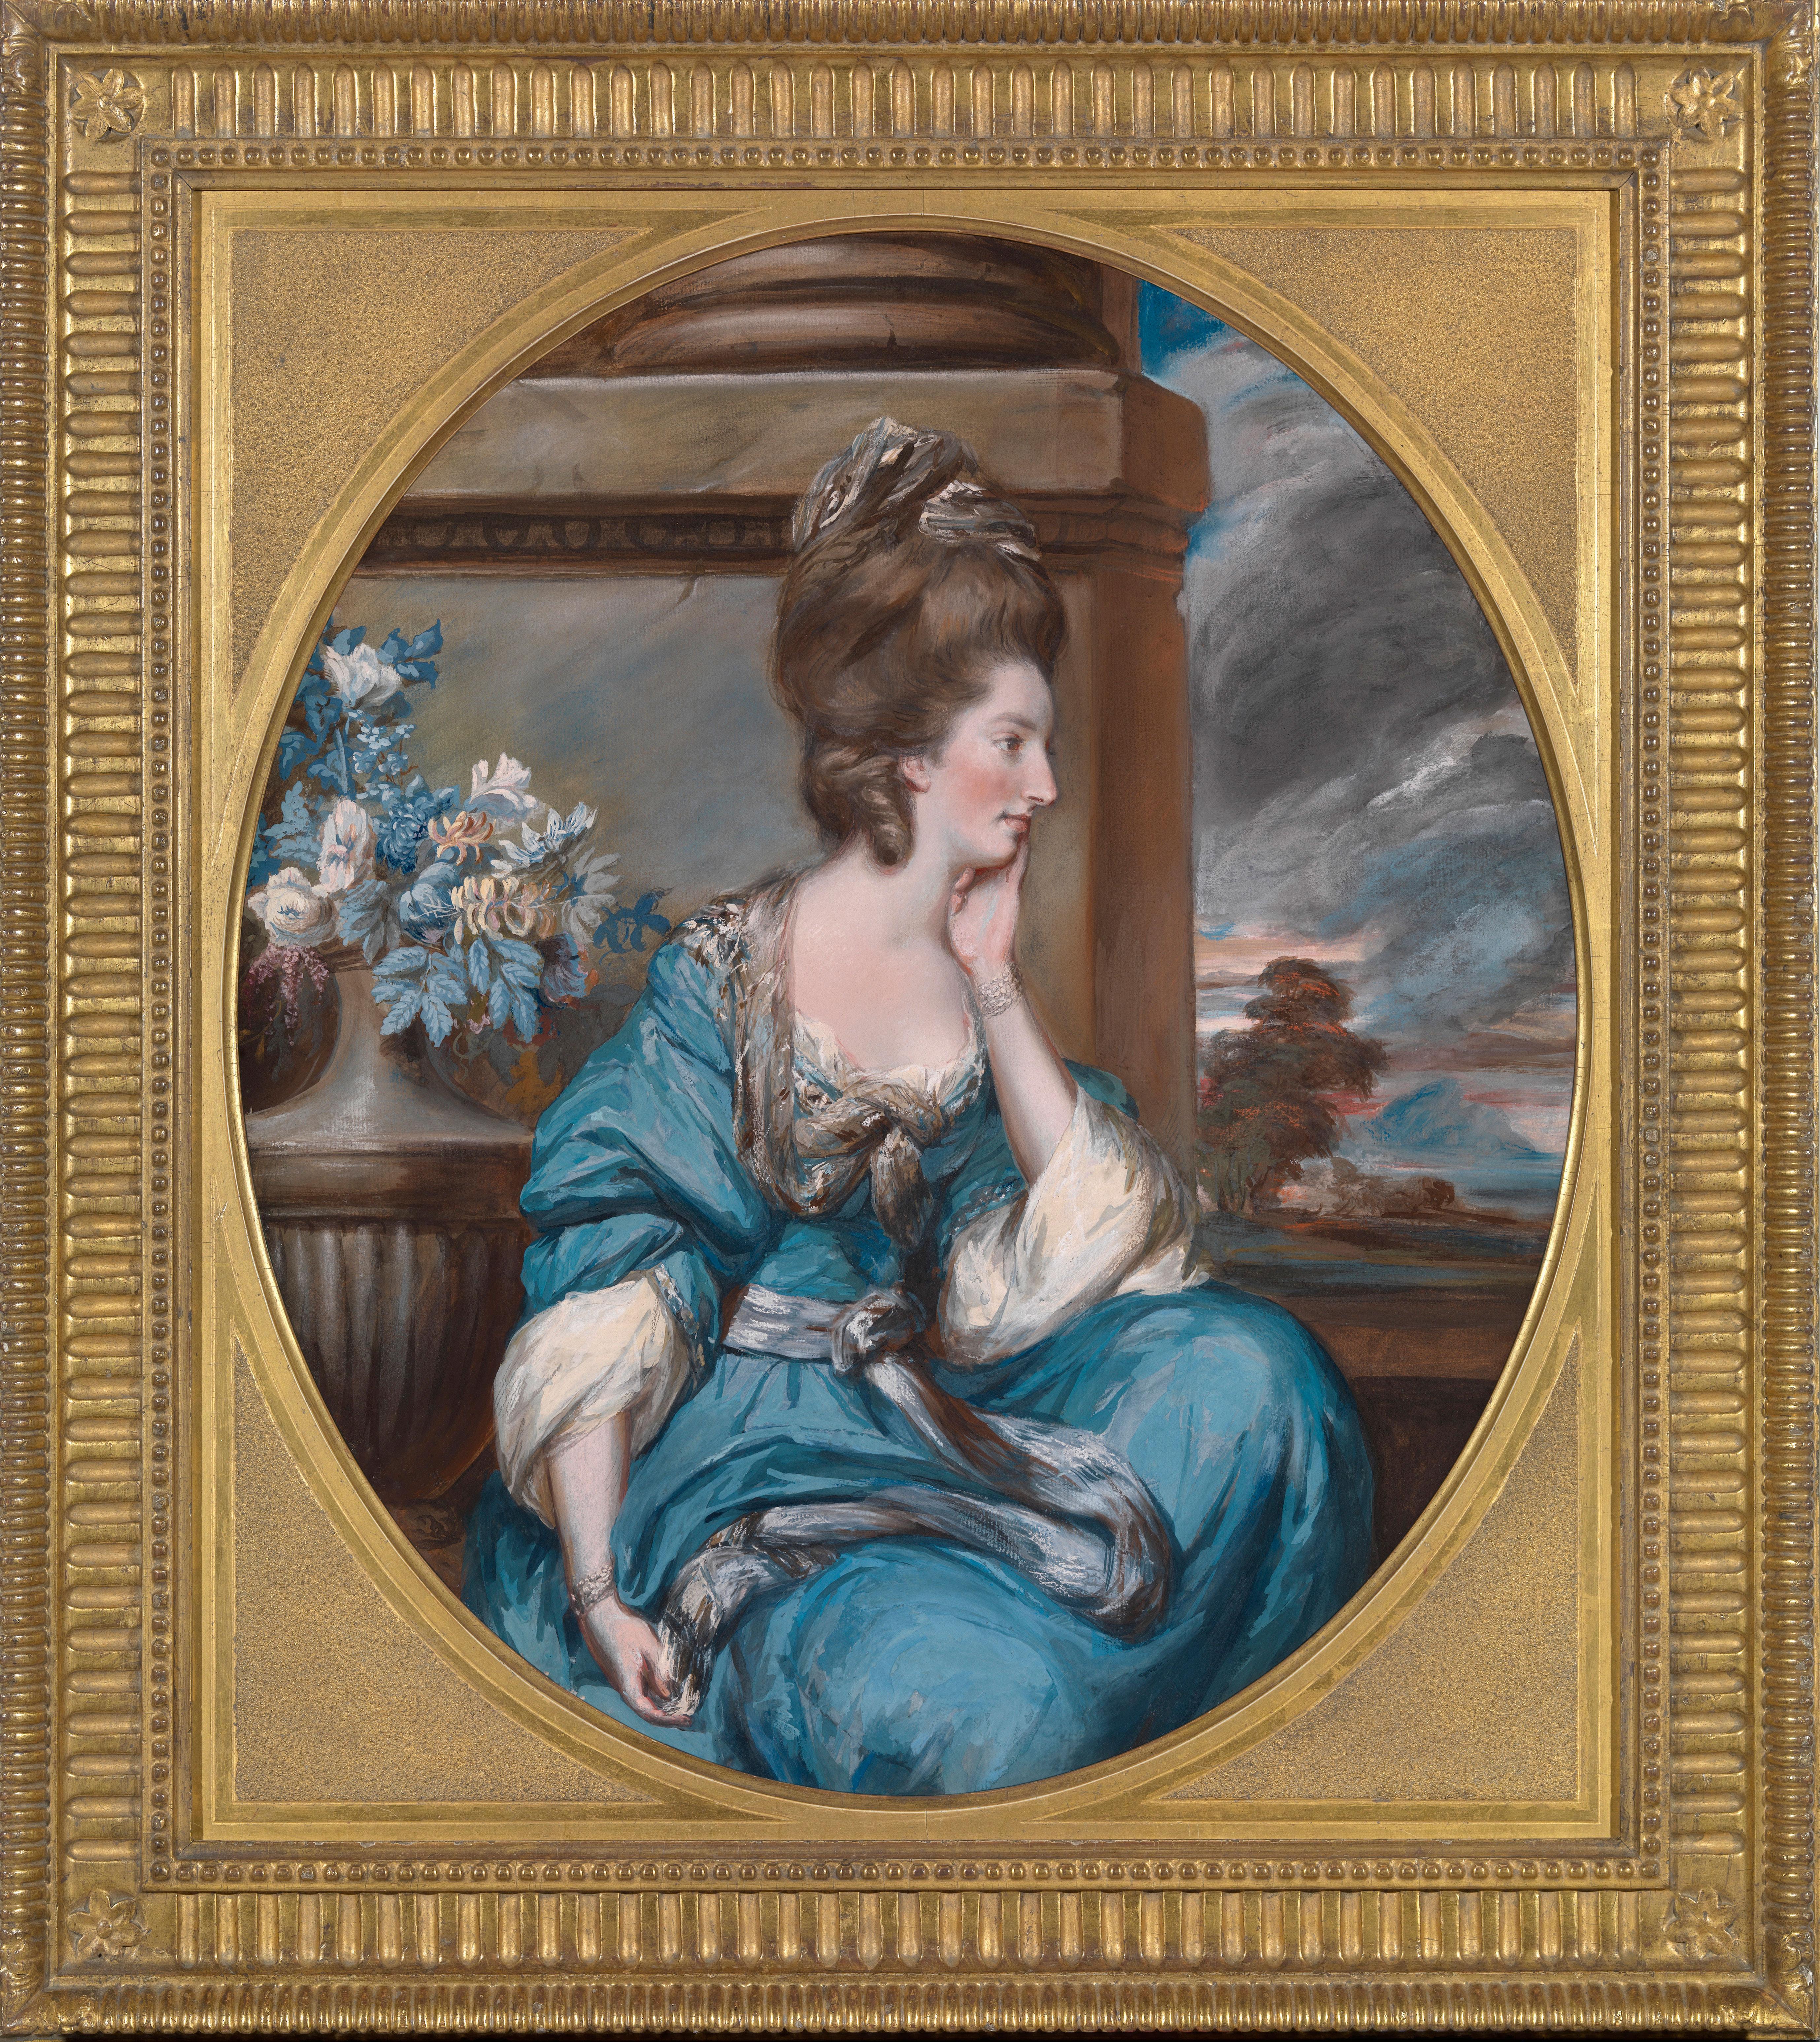 Portraits of the Hon. Mary Shuttleworth and Anna Maria, 9th Baroness Forrester